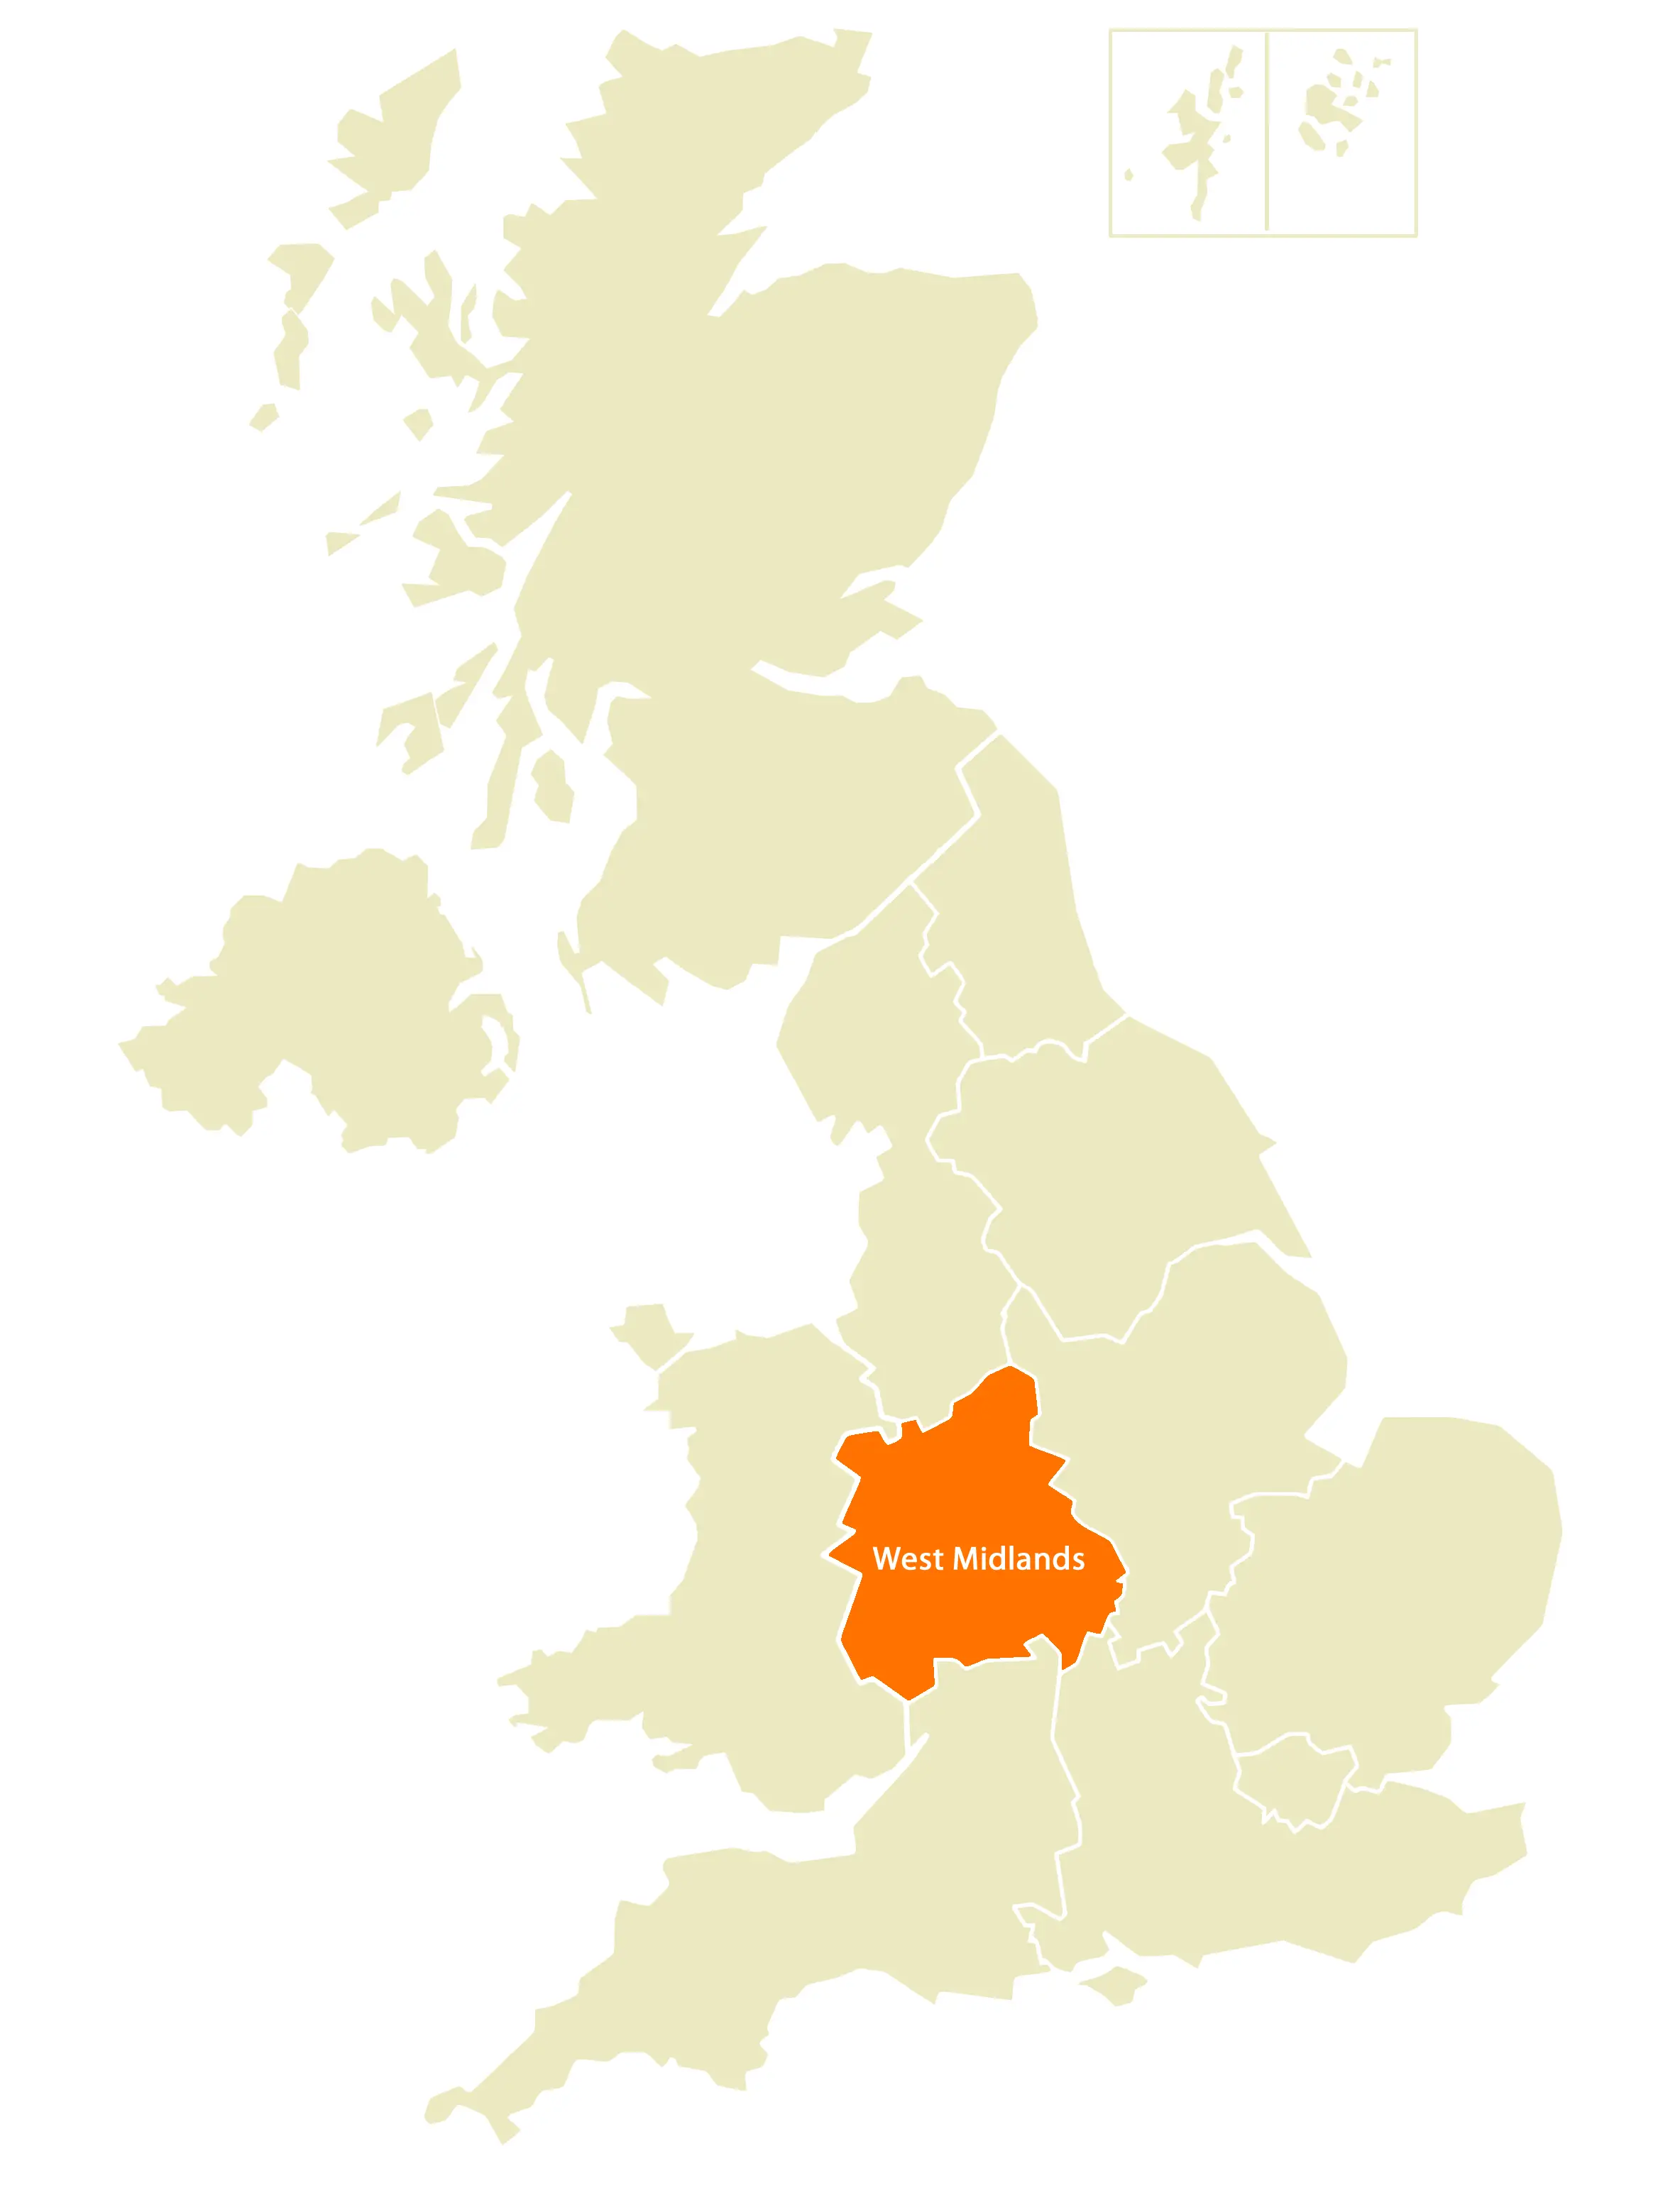 Location Map of West Midlands